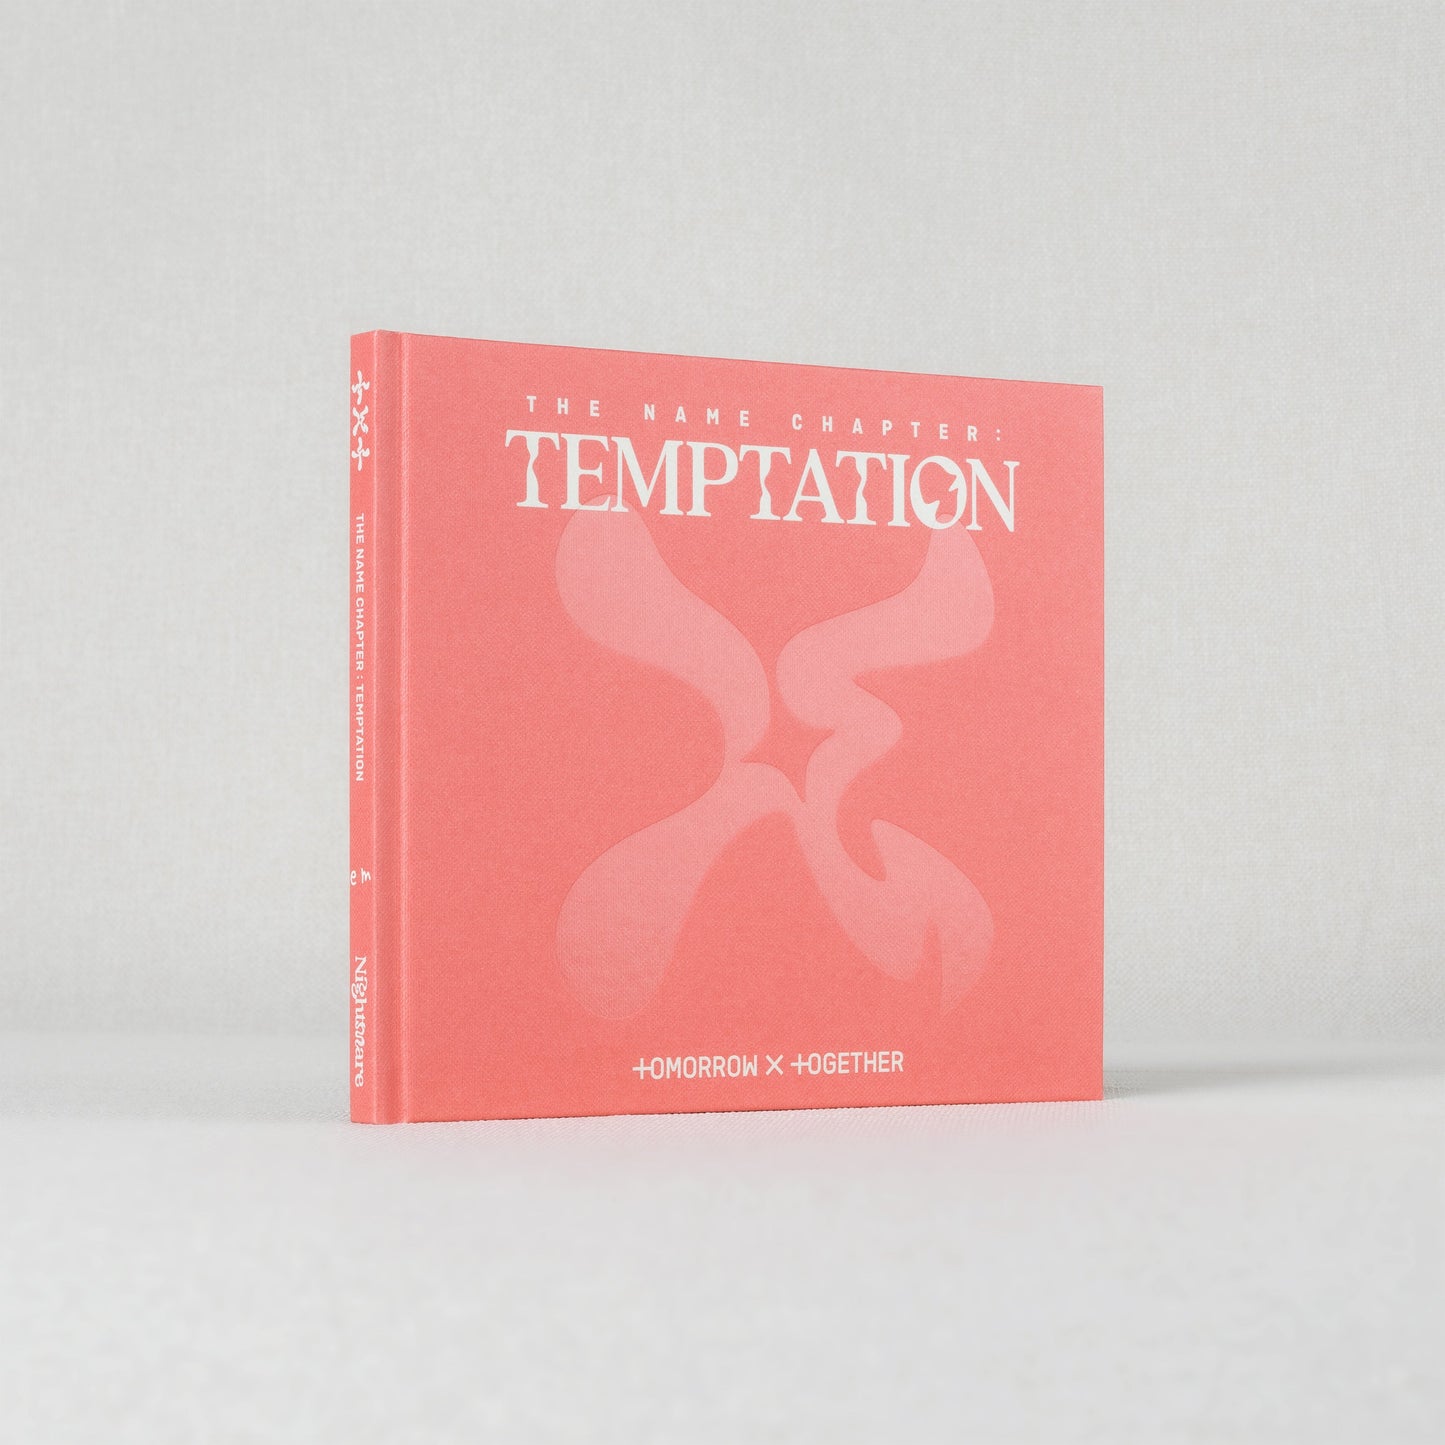 TOMORROW X TOGETHER (TXT) ALBUM 'THE NAME CHAPTER : TEMPTATION' NIGHTMARE VERSION COVER